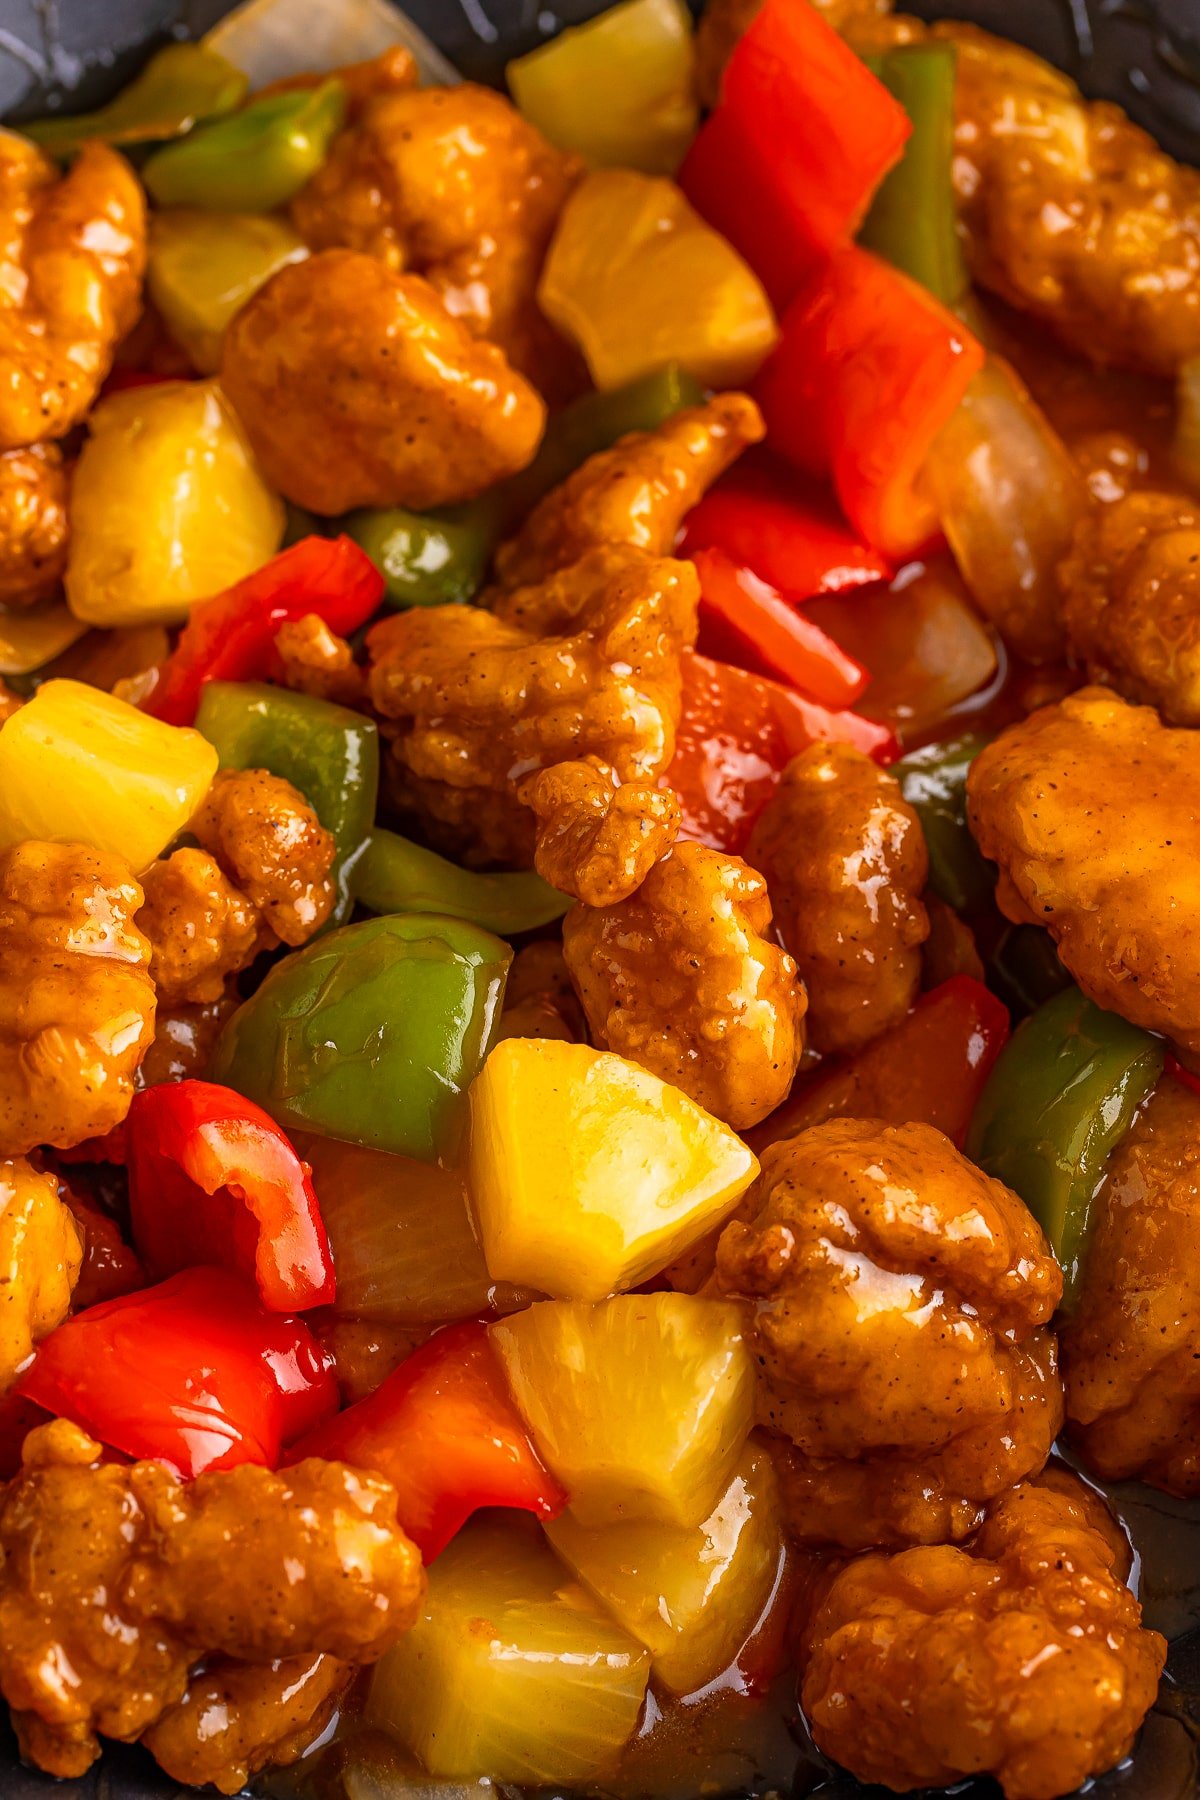 Hong Kong Style Sweet and Sour Chicken up close photo in the wok